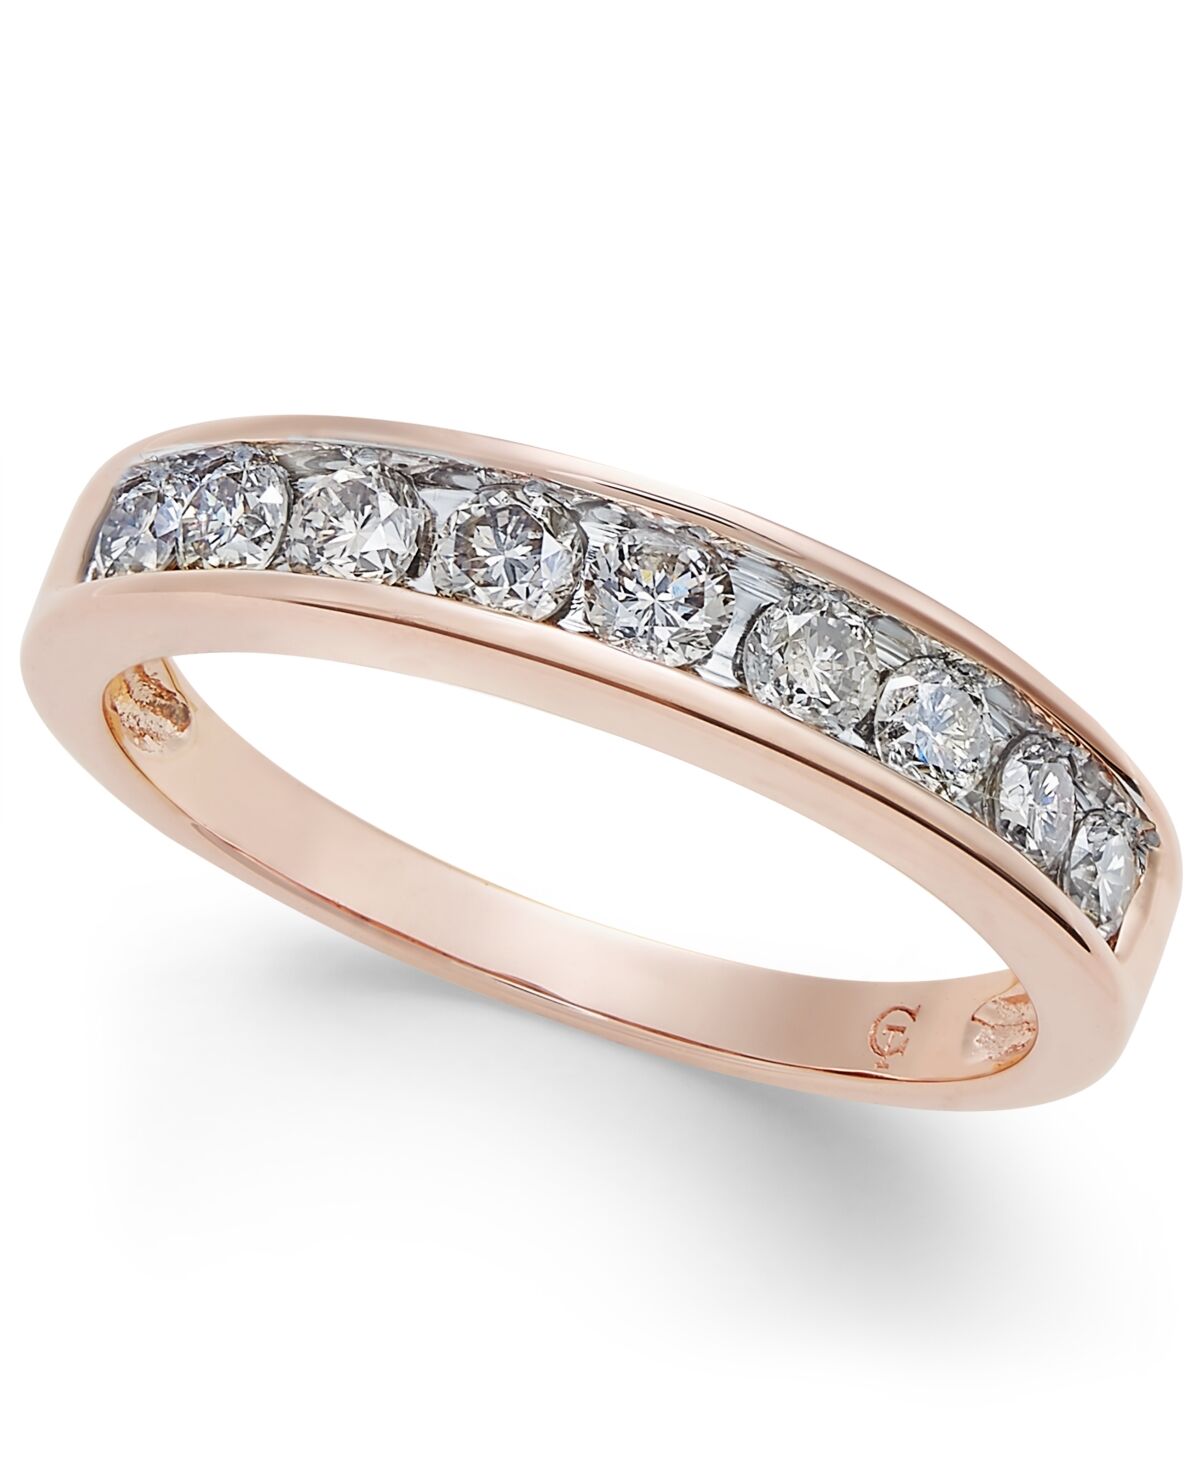 Macy's Diamond Channel Ring (1/2 ct. t.w.) in 14k Yellow or Rose Gold - Rose Gold